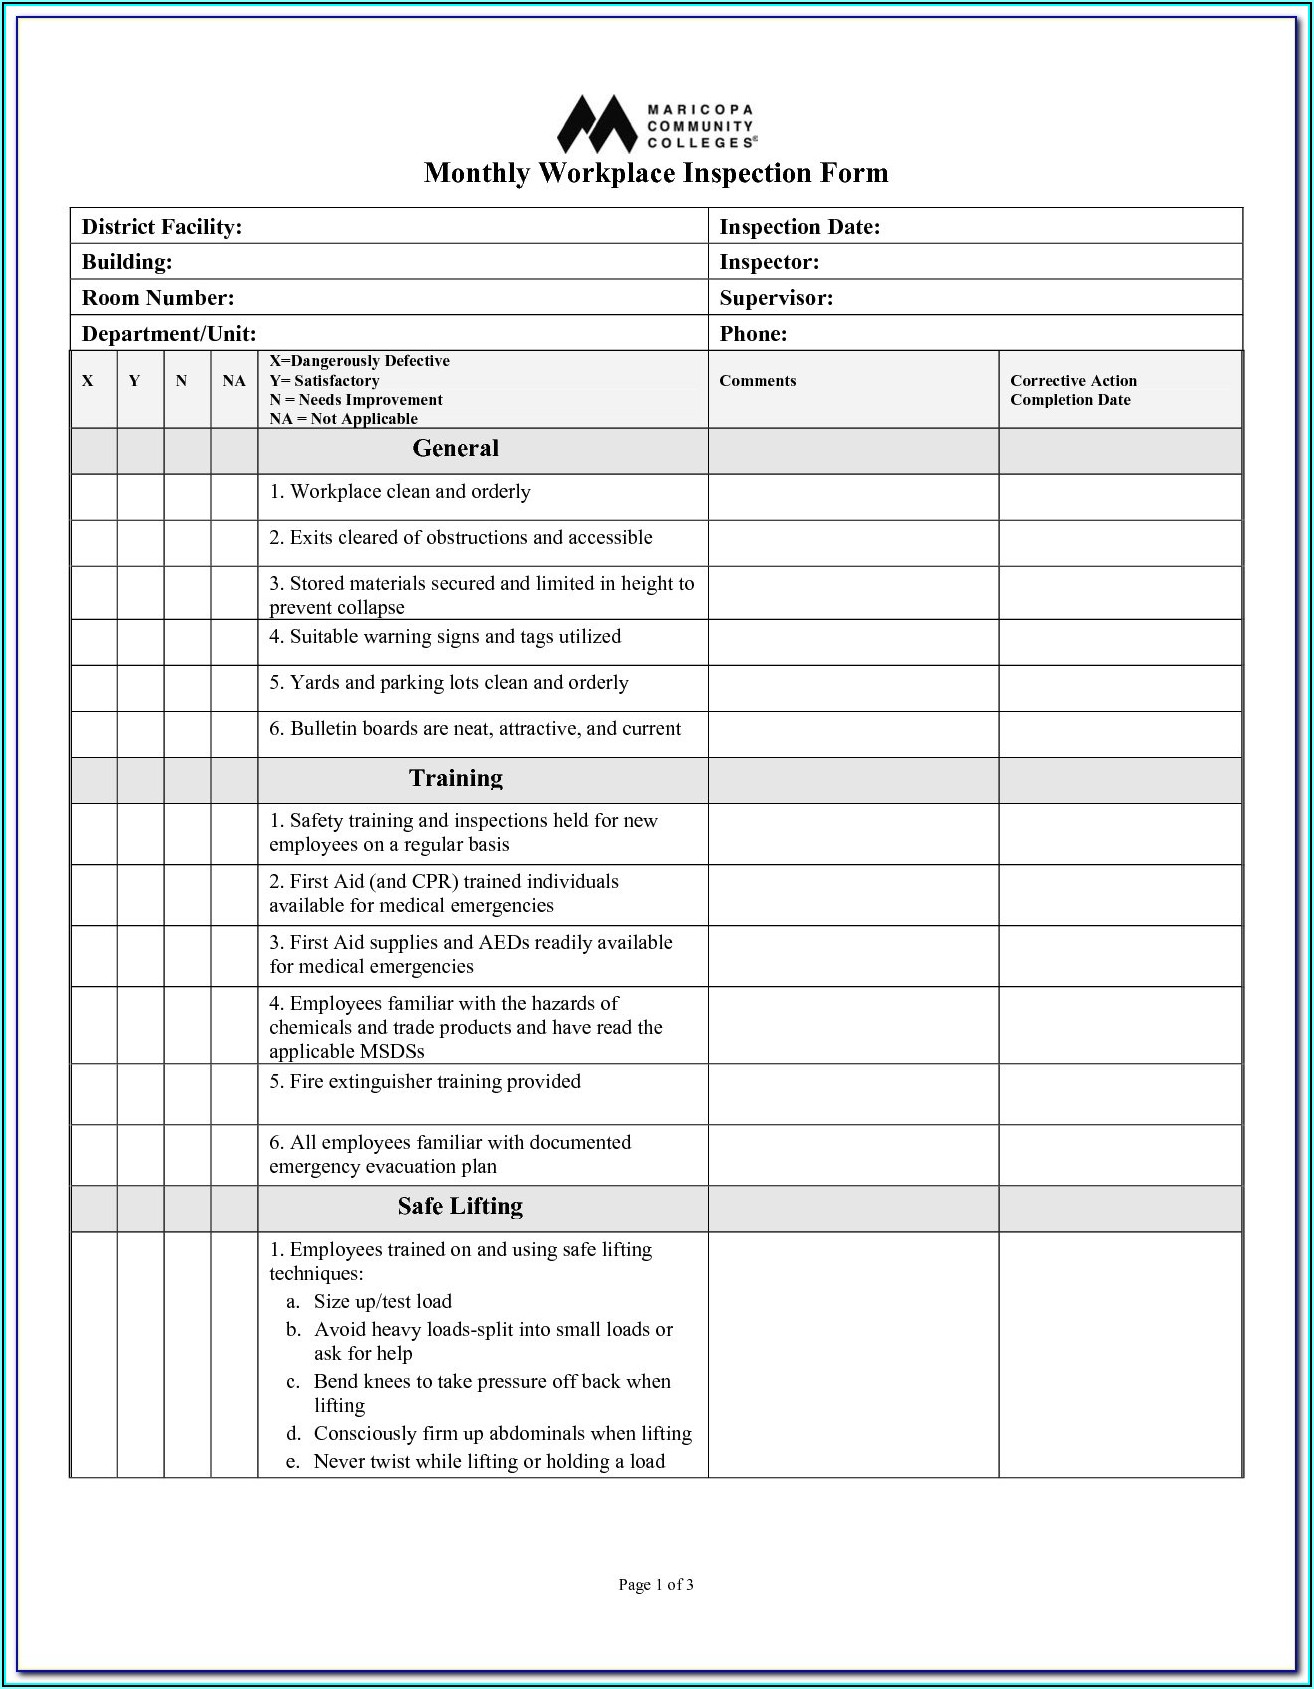 Osha Chain Sling Inspection Forms